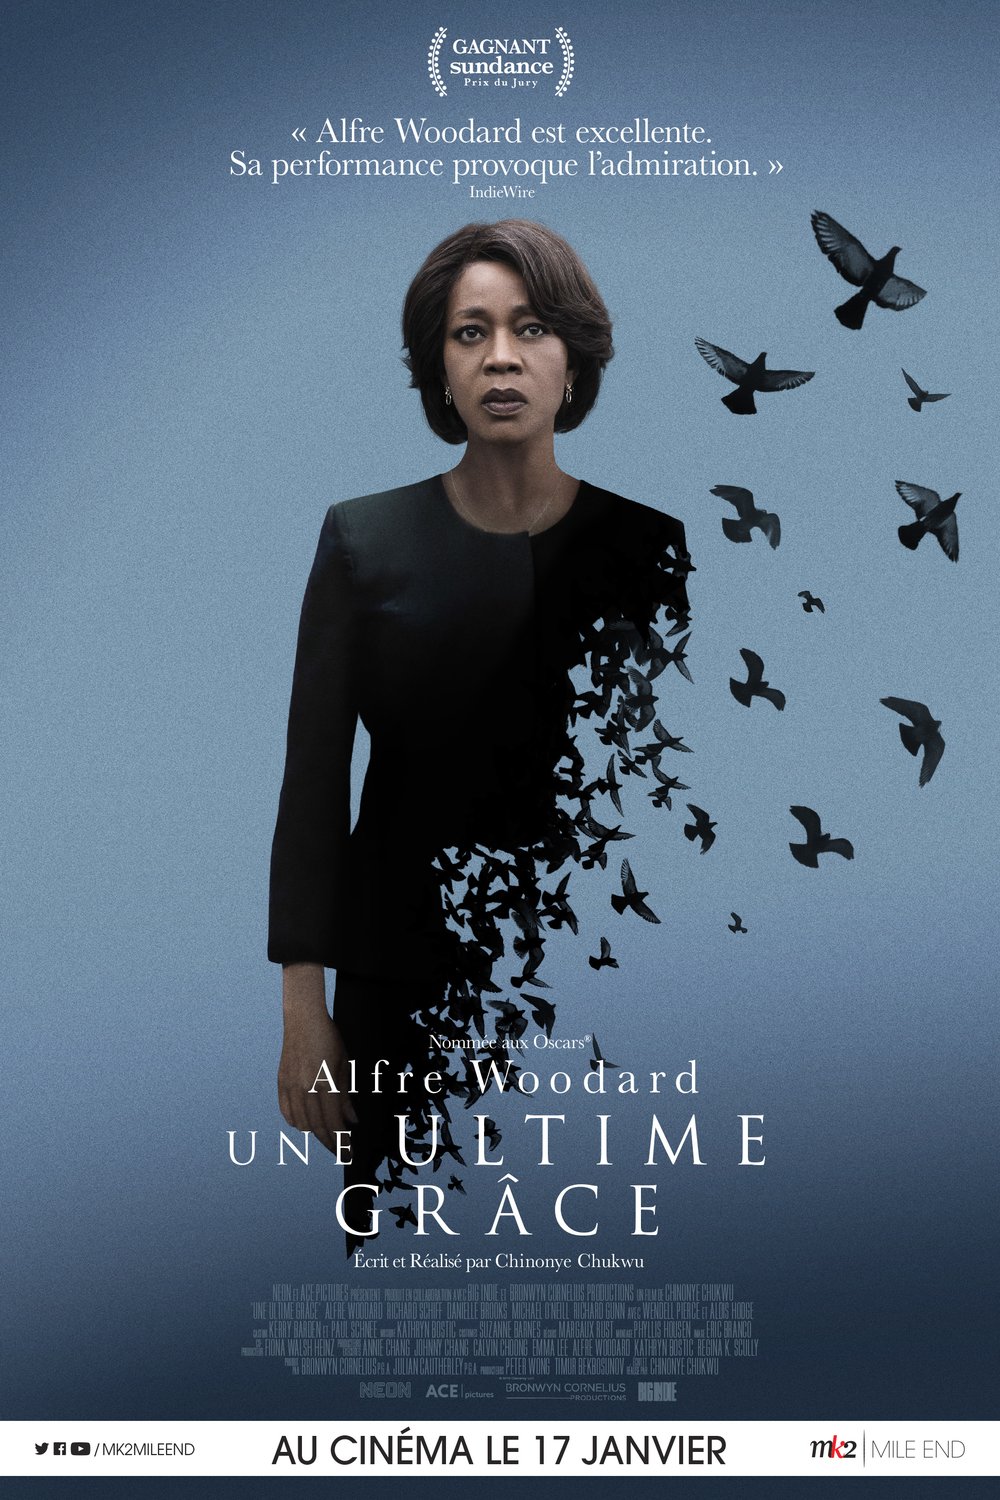 Poster of the movie Une ultime grâce